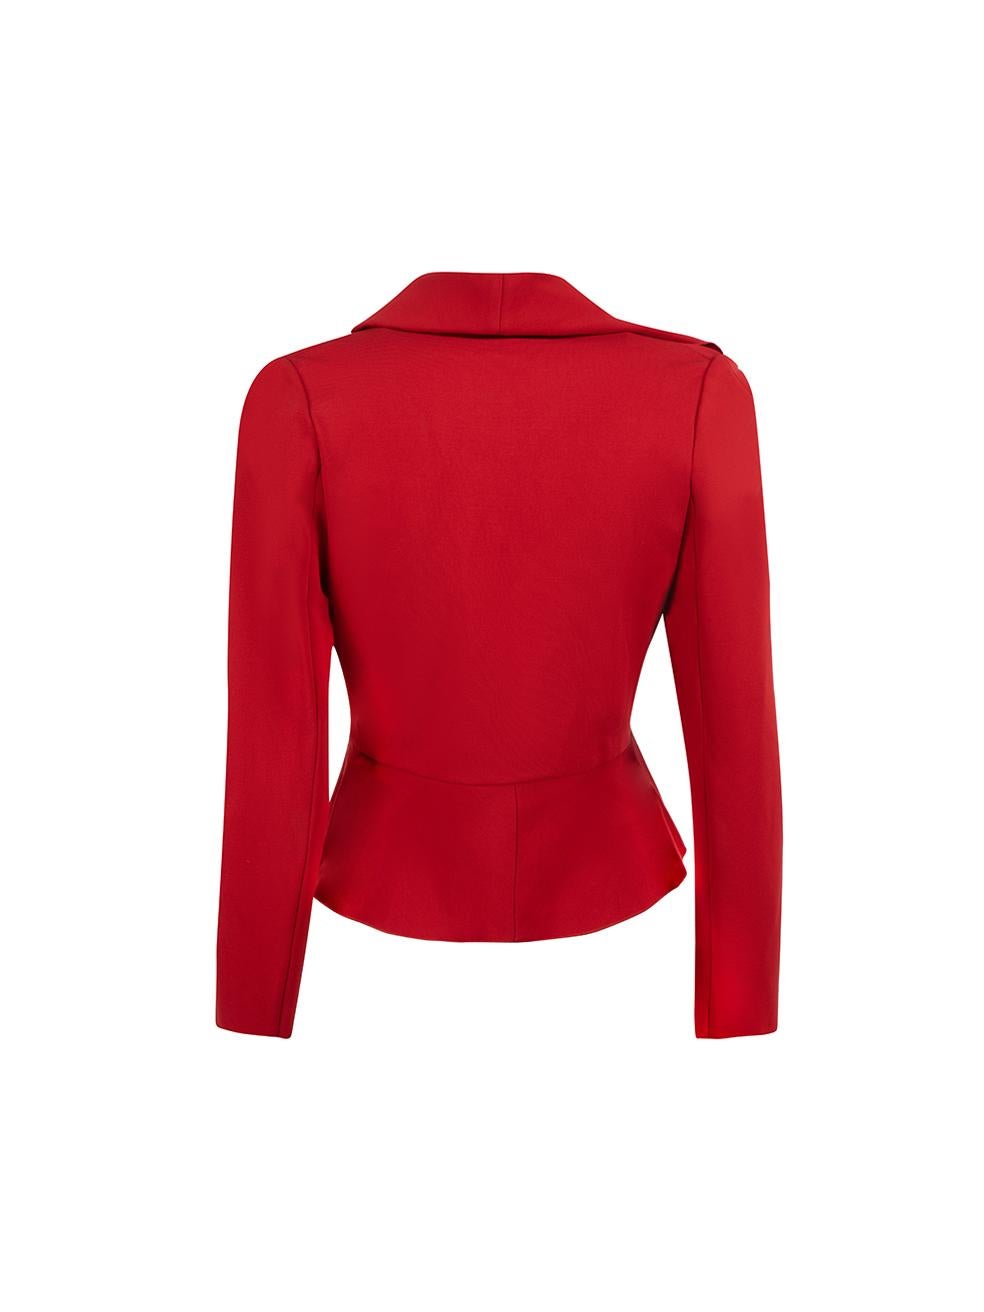 Valentino Valentino Spa Red Ruffle Detail Cropped Jacket Size M In Excellent Condition In London, GB